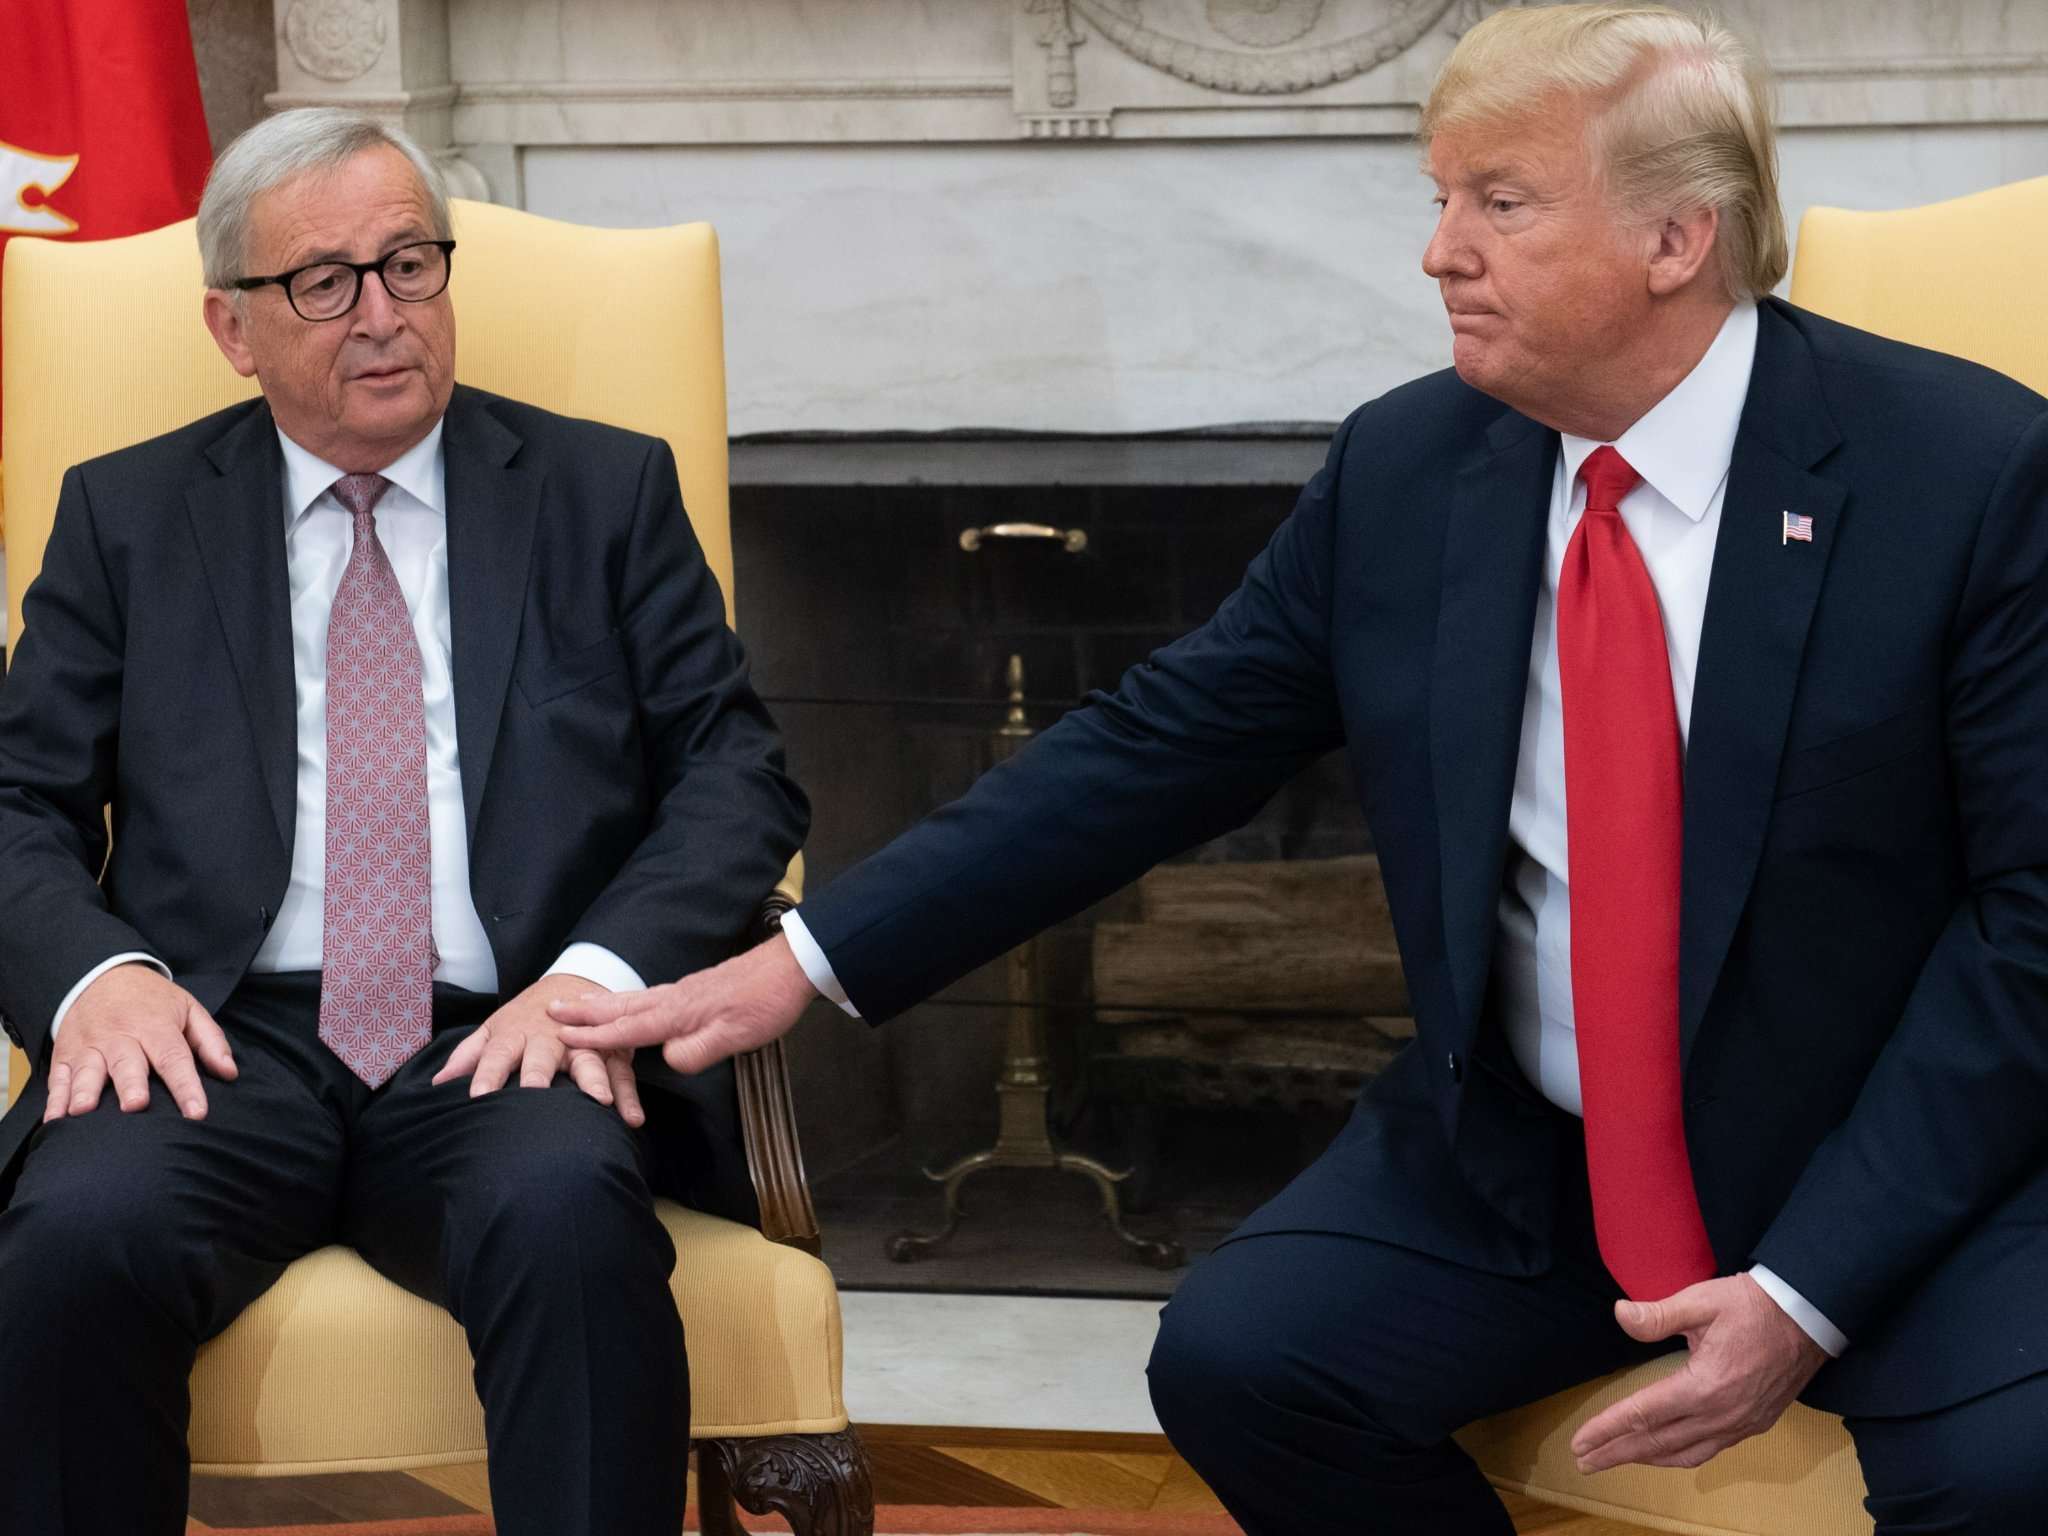 image for Juncker used ‘brightly coloured, simple flashcards’ to explain trade to Trump during meeting